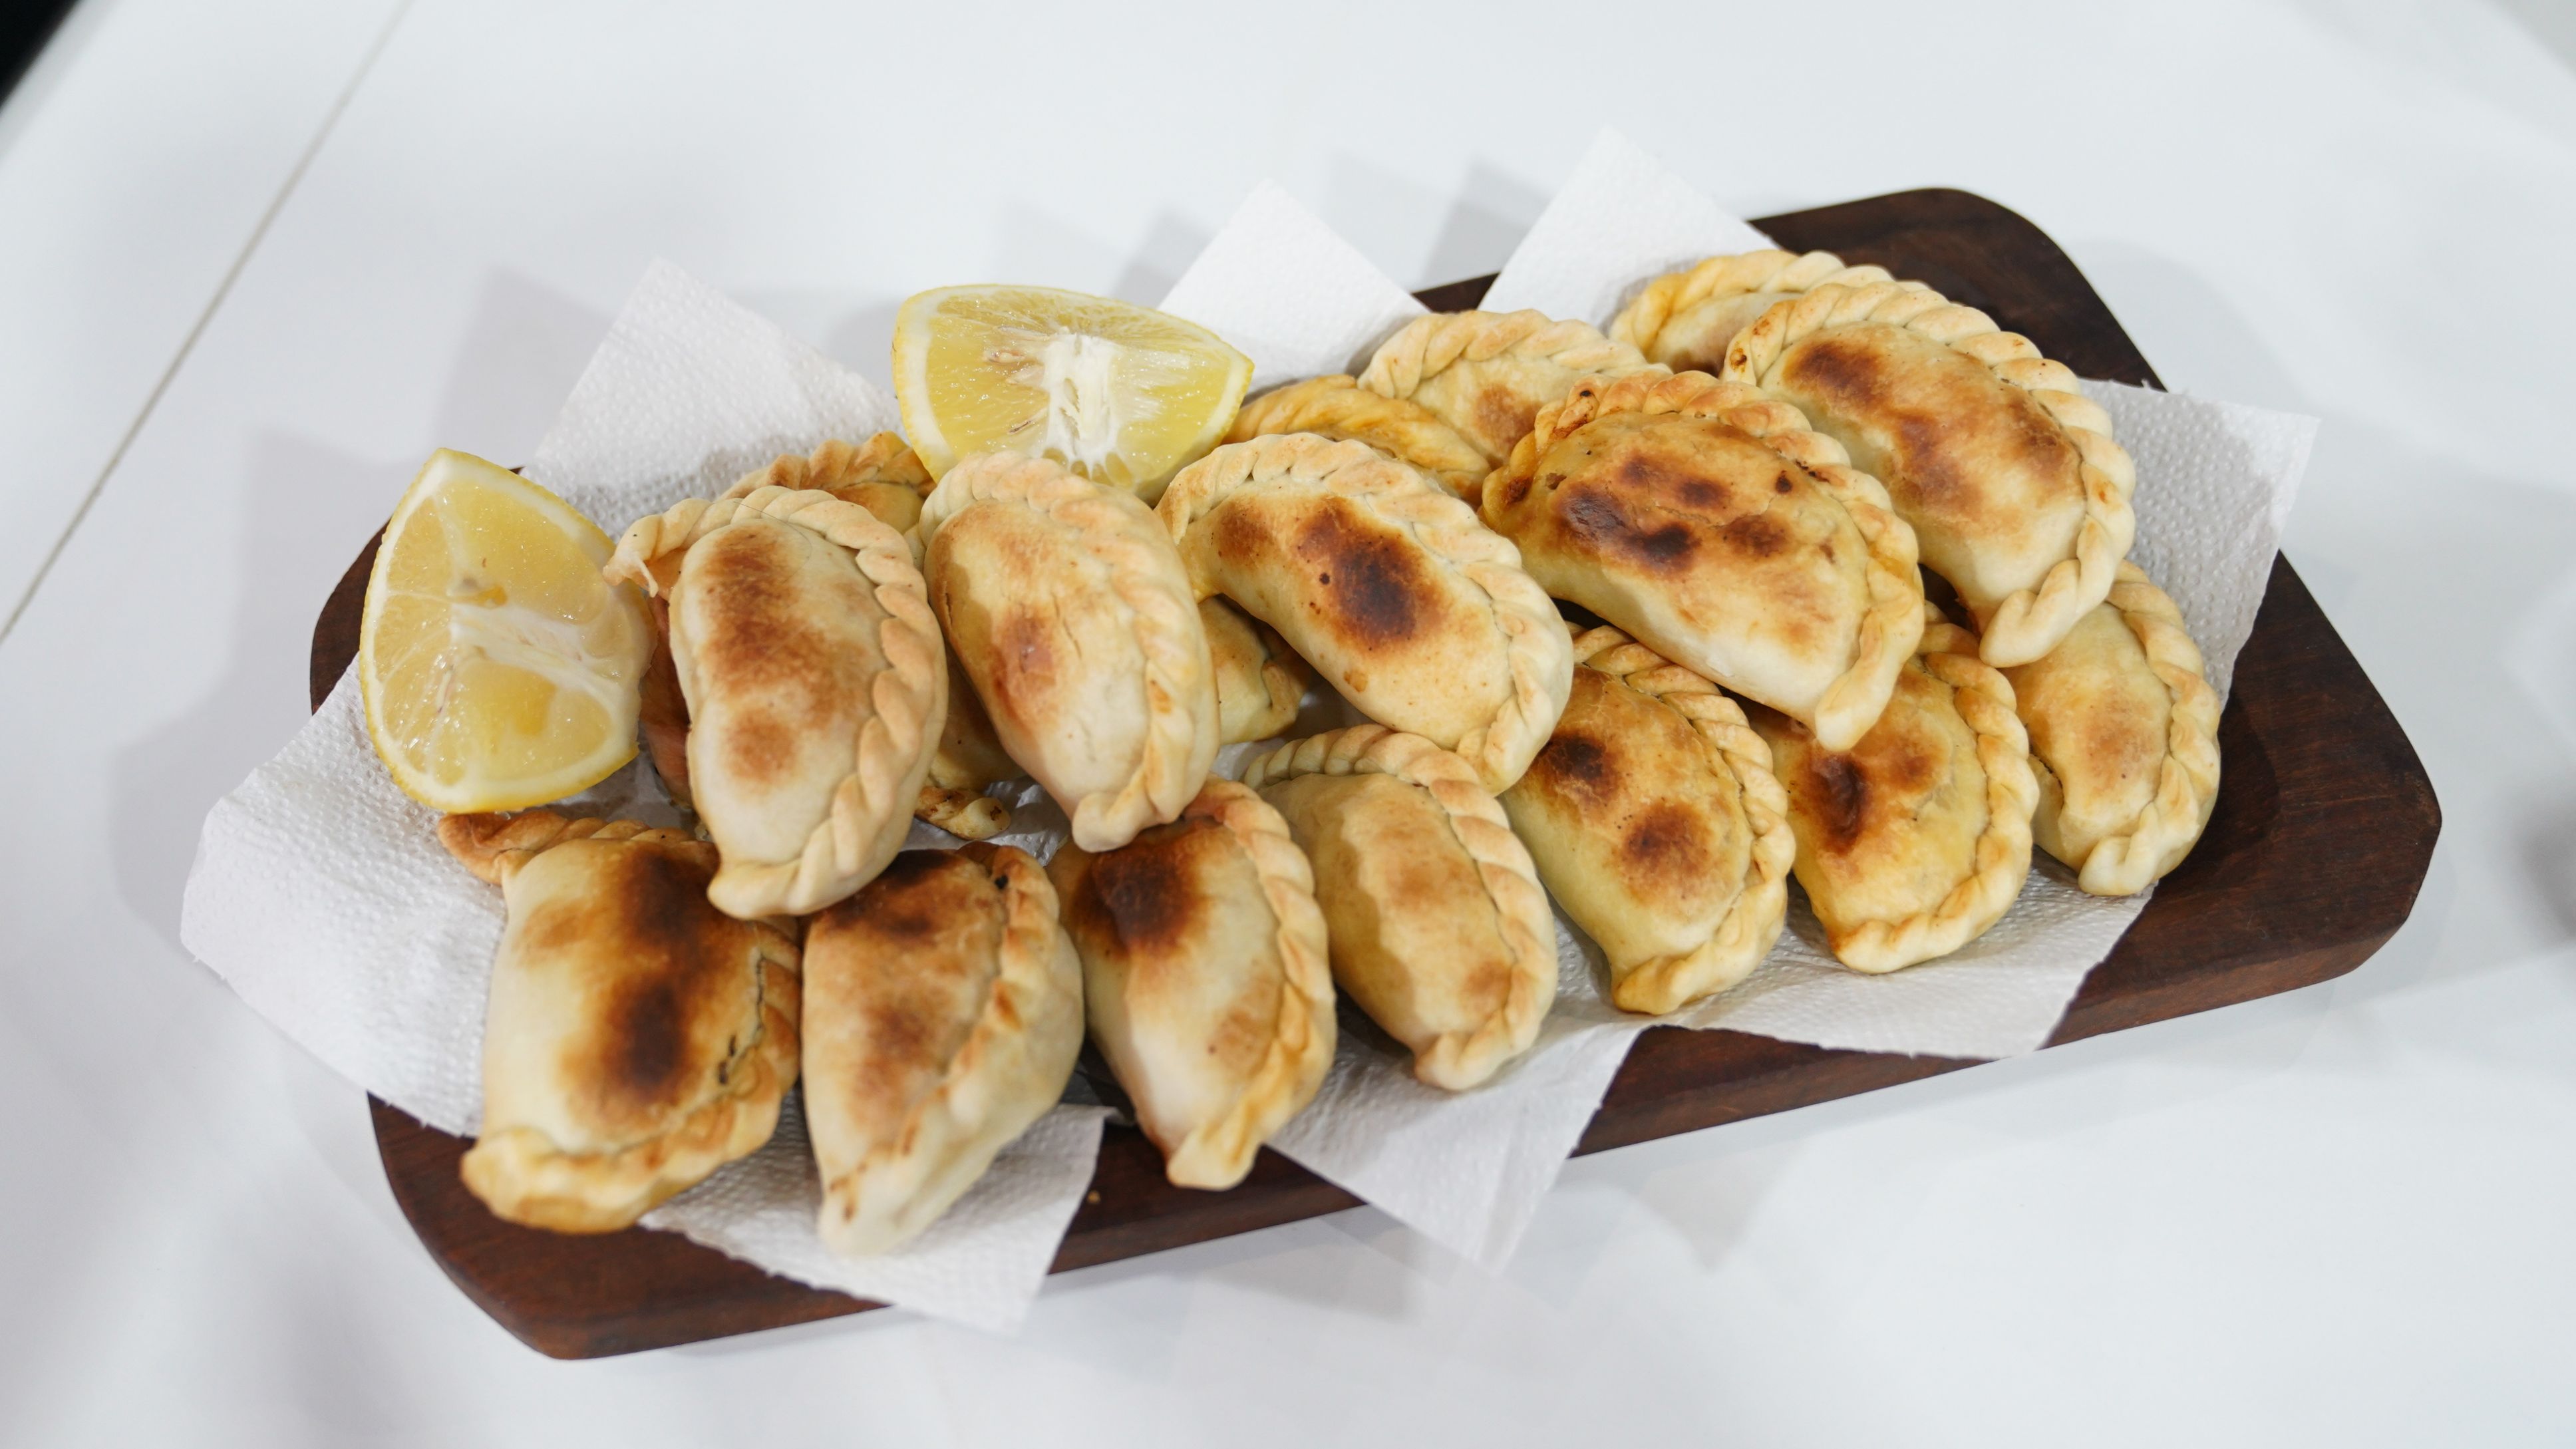 Matambre, cumin, chopped egg, 13 repulgues and cooking in a clay oven are the five characteristics that cannot be missing in a typical Tucuman empanada (Wachs Agency)